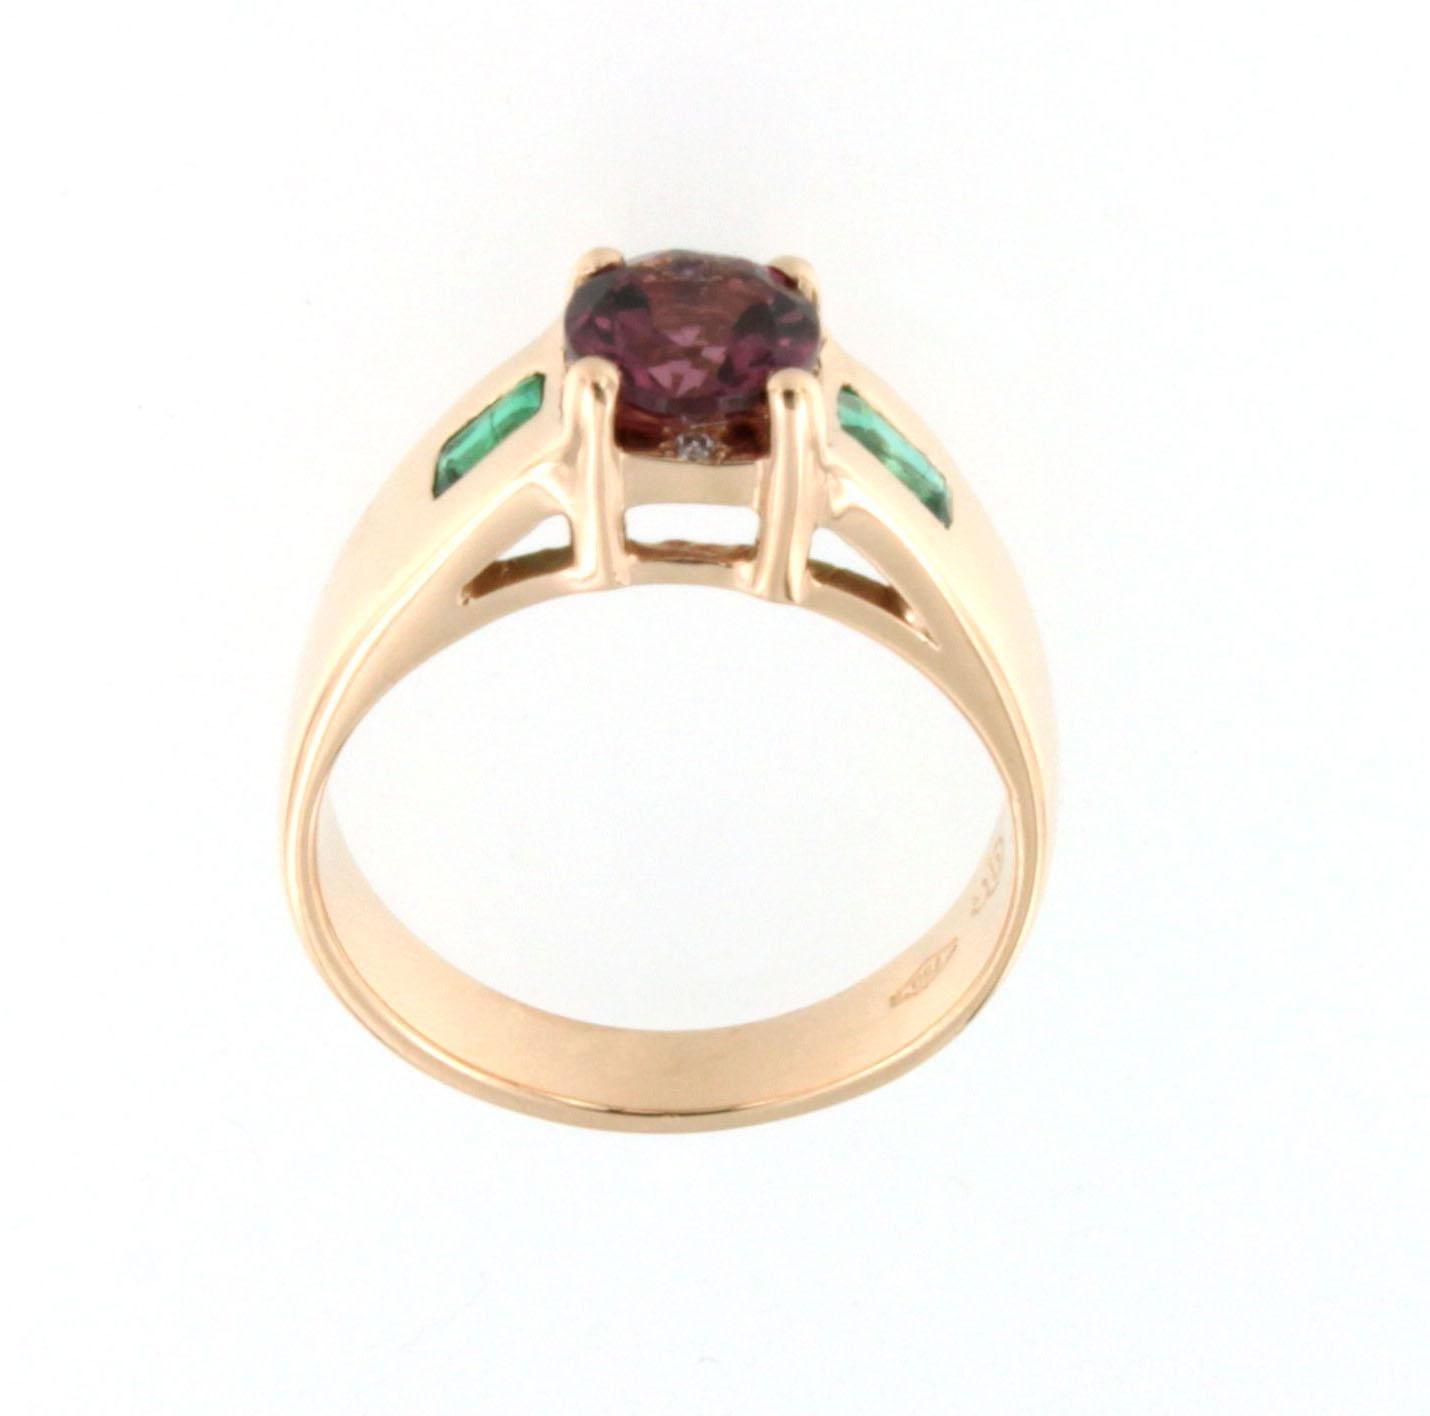 Trendy cocktail ring handmade in Italy by Stanoppi Jewellery since 1948
Ring in 18k rose gold with Pink Tourmaline (round cut, size:6,00 mm), Emerald (emerald cut, size: 2x4mm) and White Diamonds cts0.07  VS colour G/H

Size of ring:  EU 12 -  52,5 